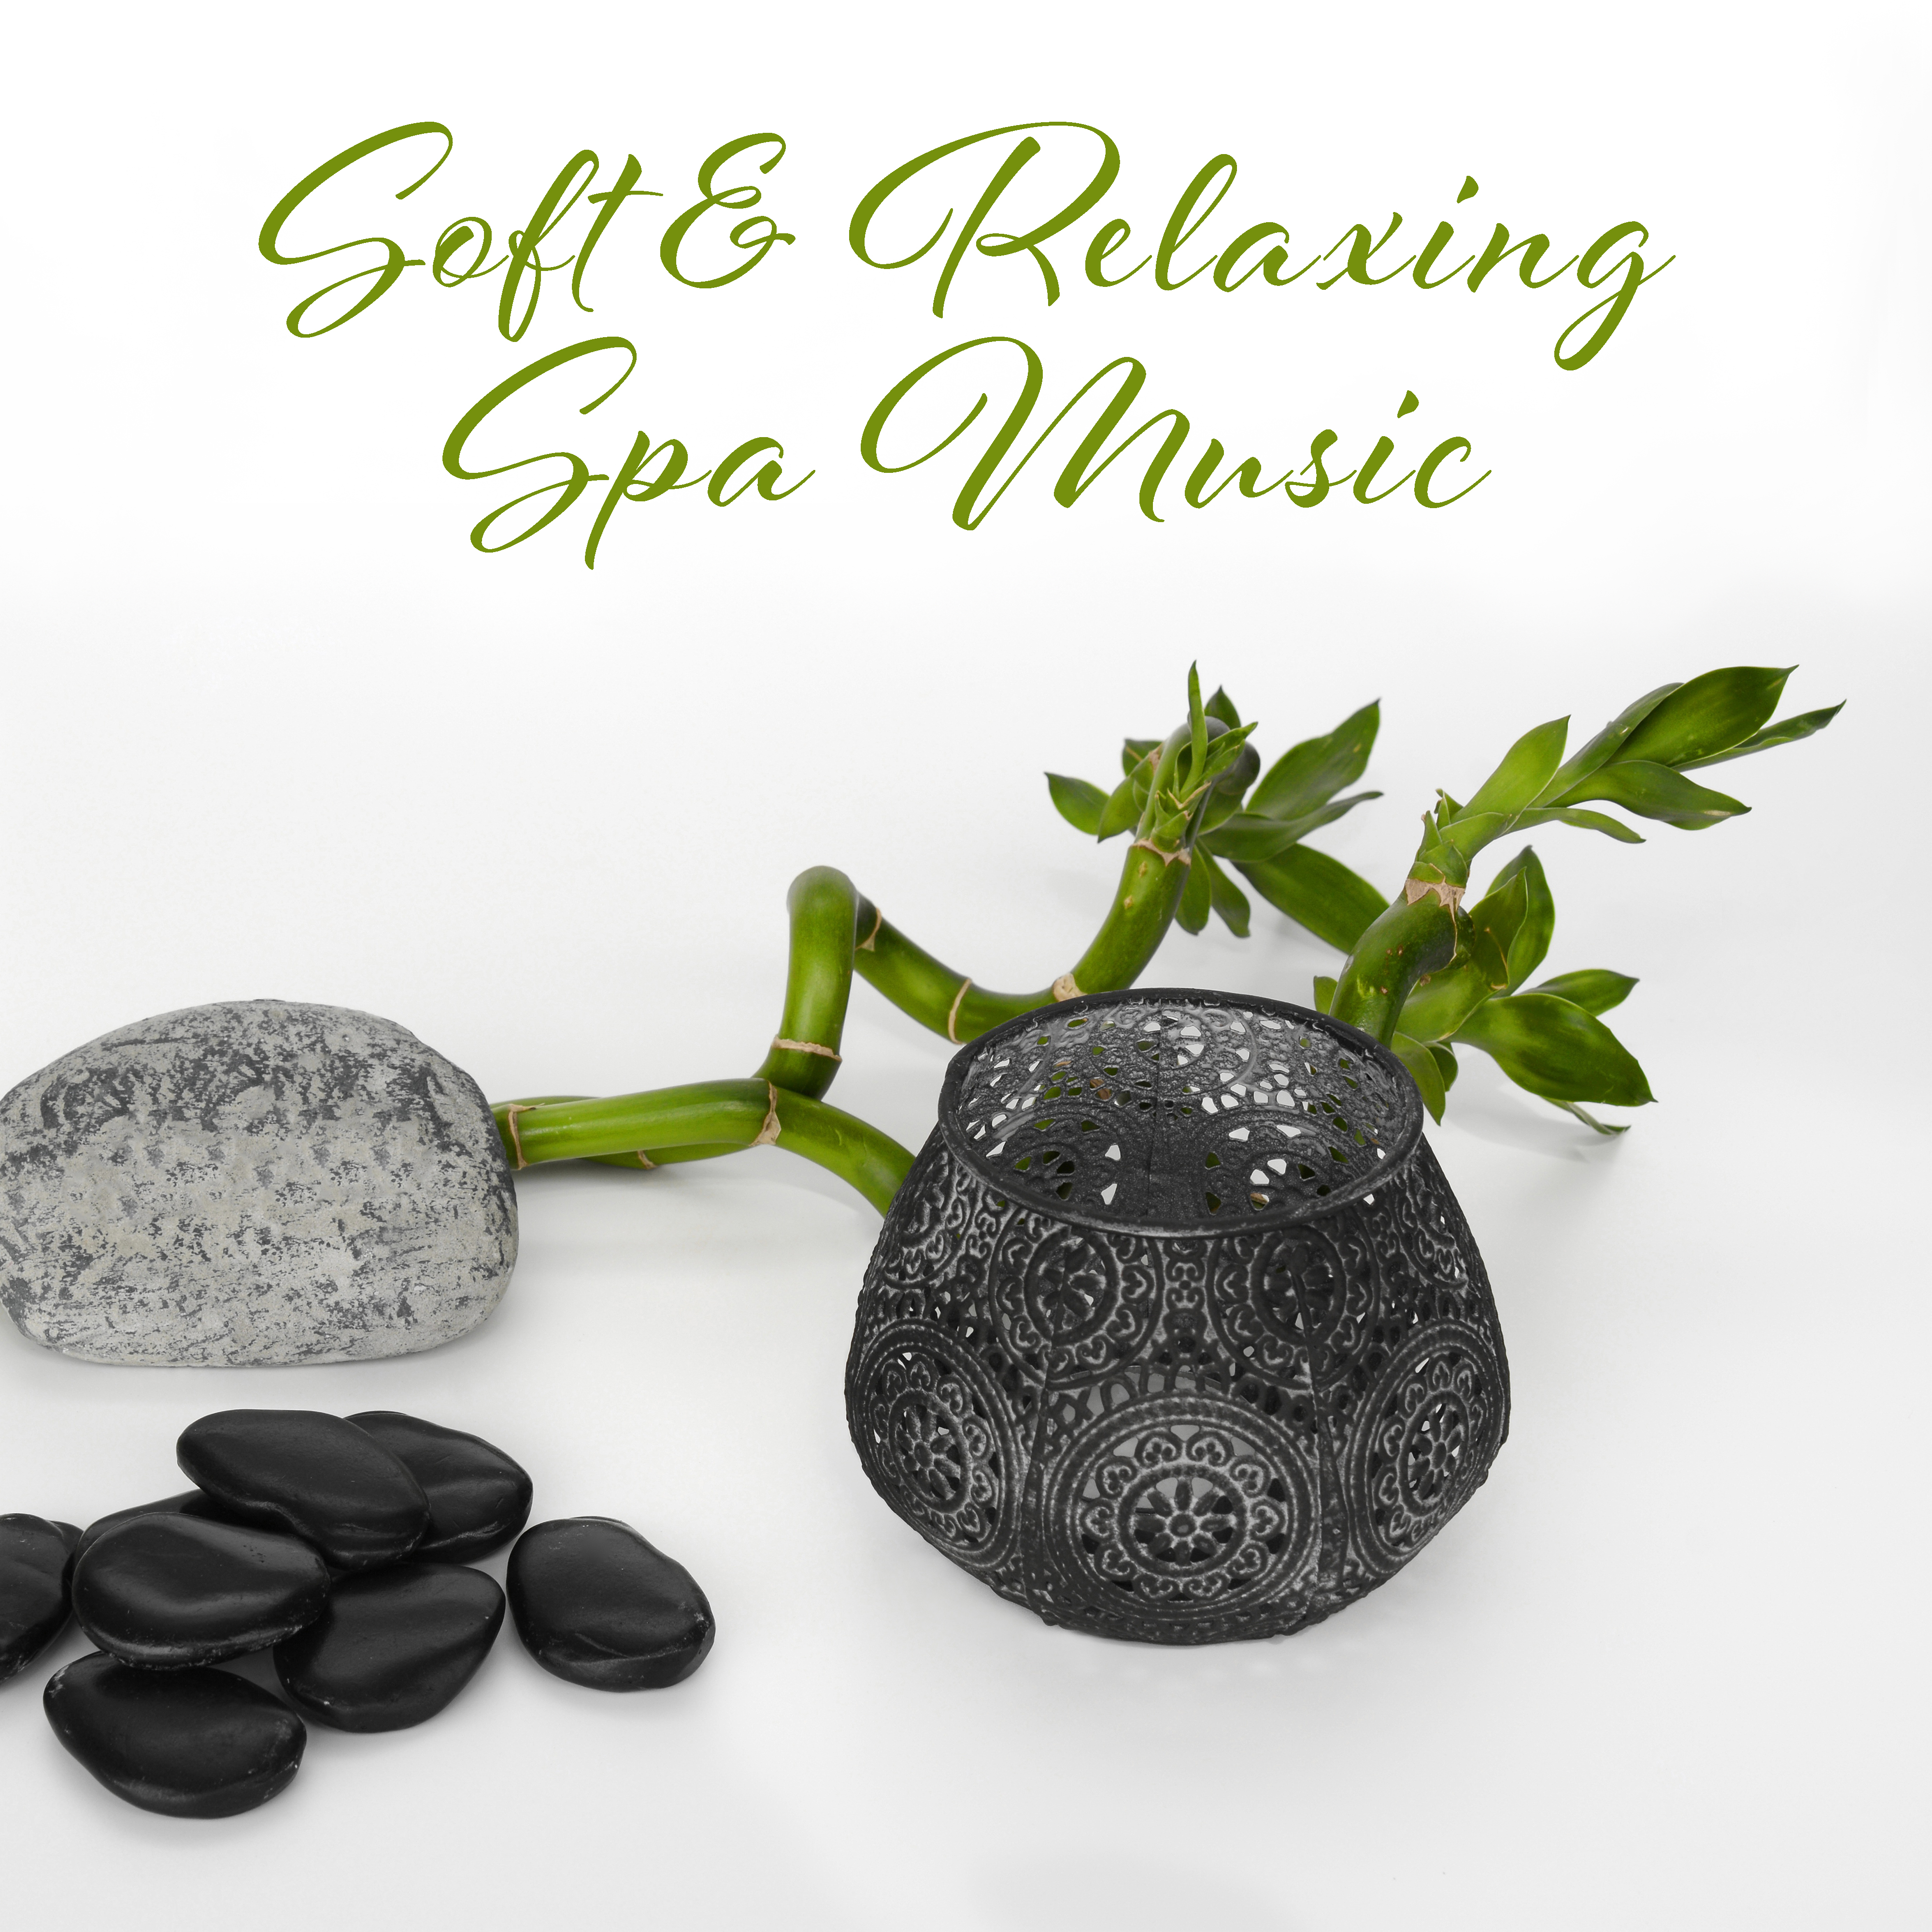 Soft  Relaxing Spa Music  Time to Calm Down, Peaceful Melodies, Stress Relieve, Spa Massage, Beautiful Moments